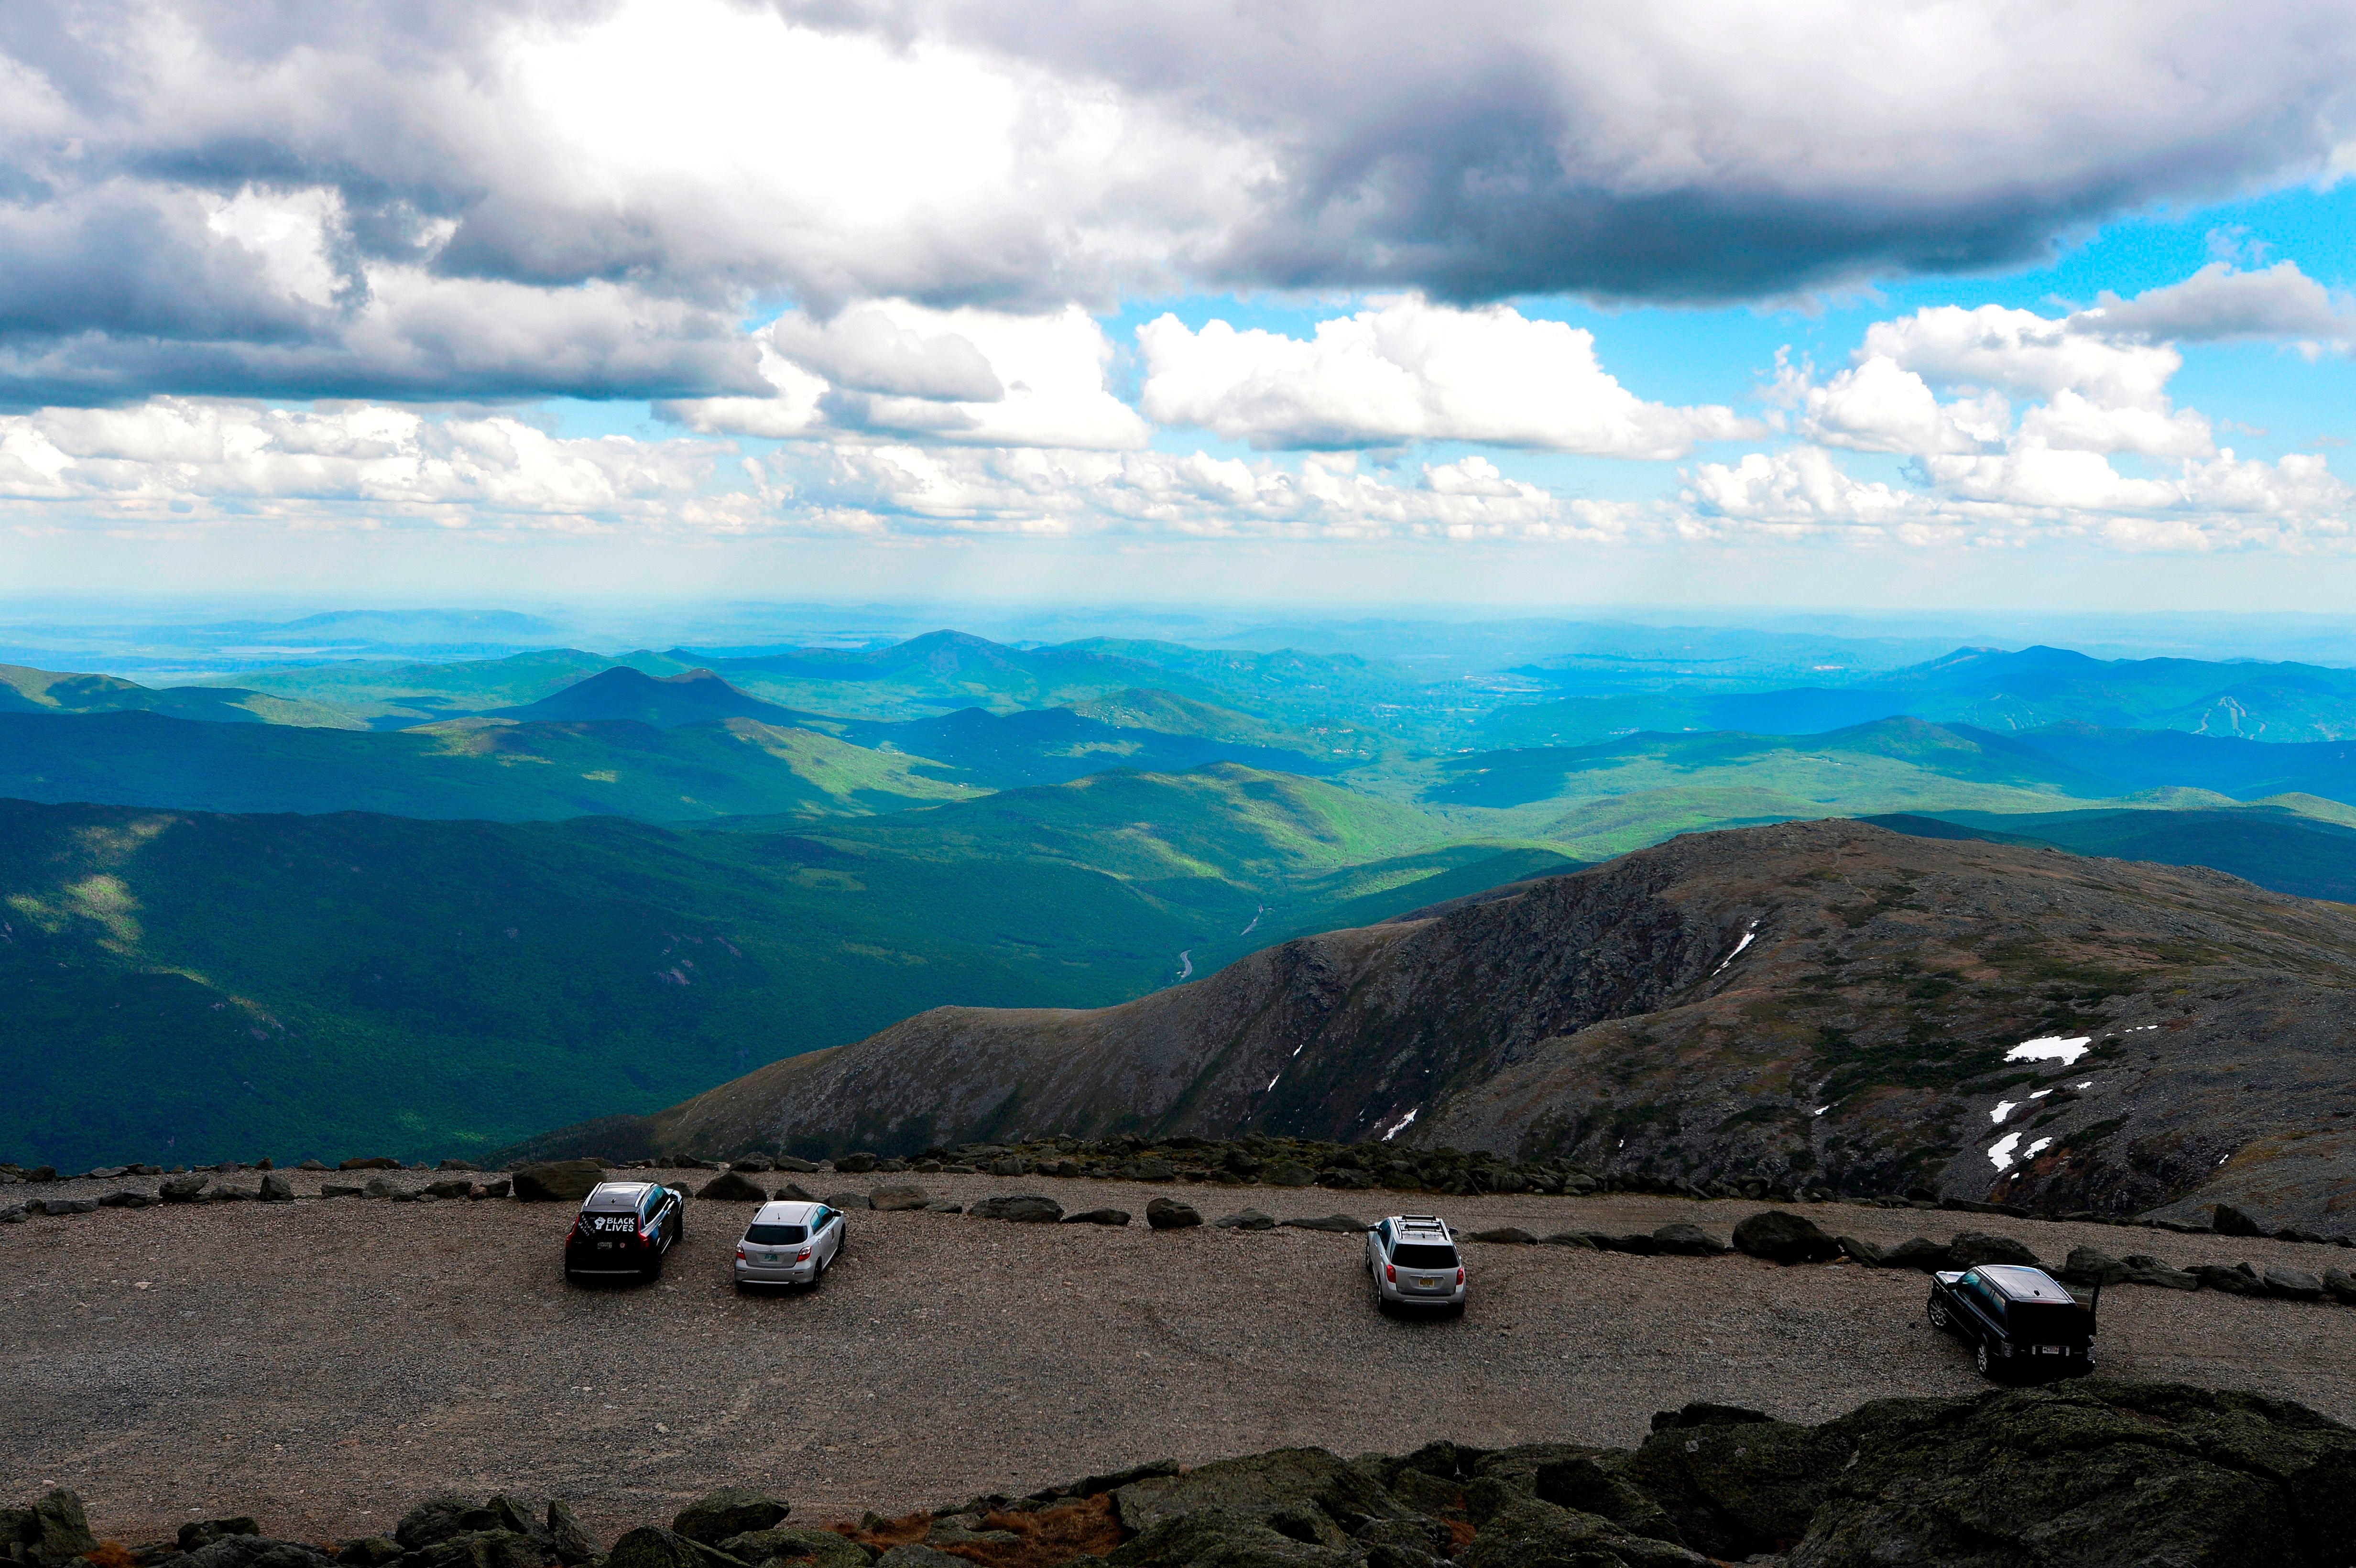 A view from the auto road on Mount Washington, standing at an elevation of 6,288.2 ft, looking out to the surrounding White Mountains, in the Presidential Range of the White Mountains in New Hampshire on 12 June 2020